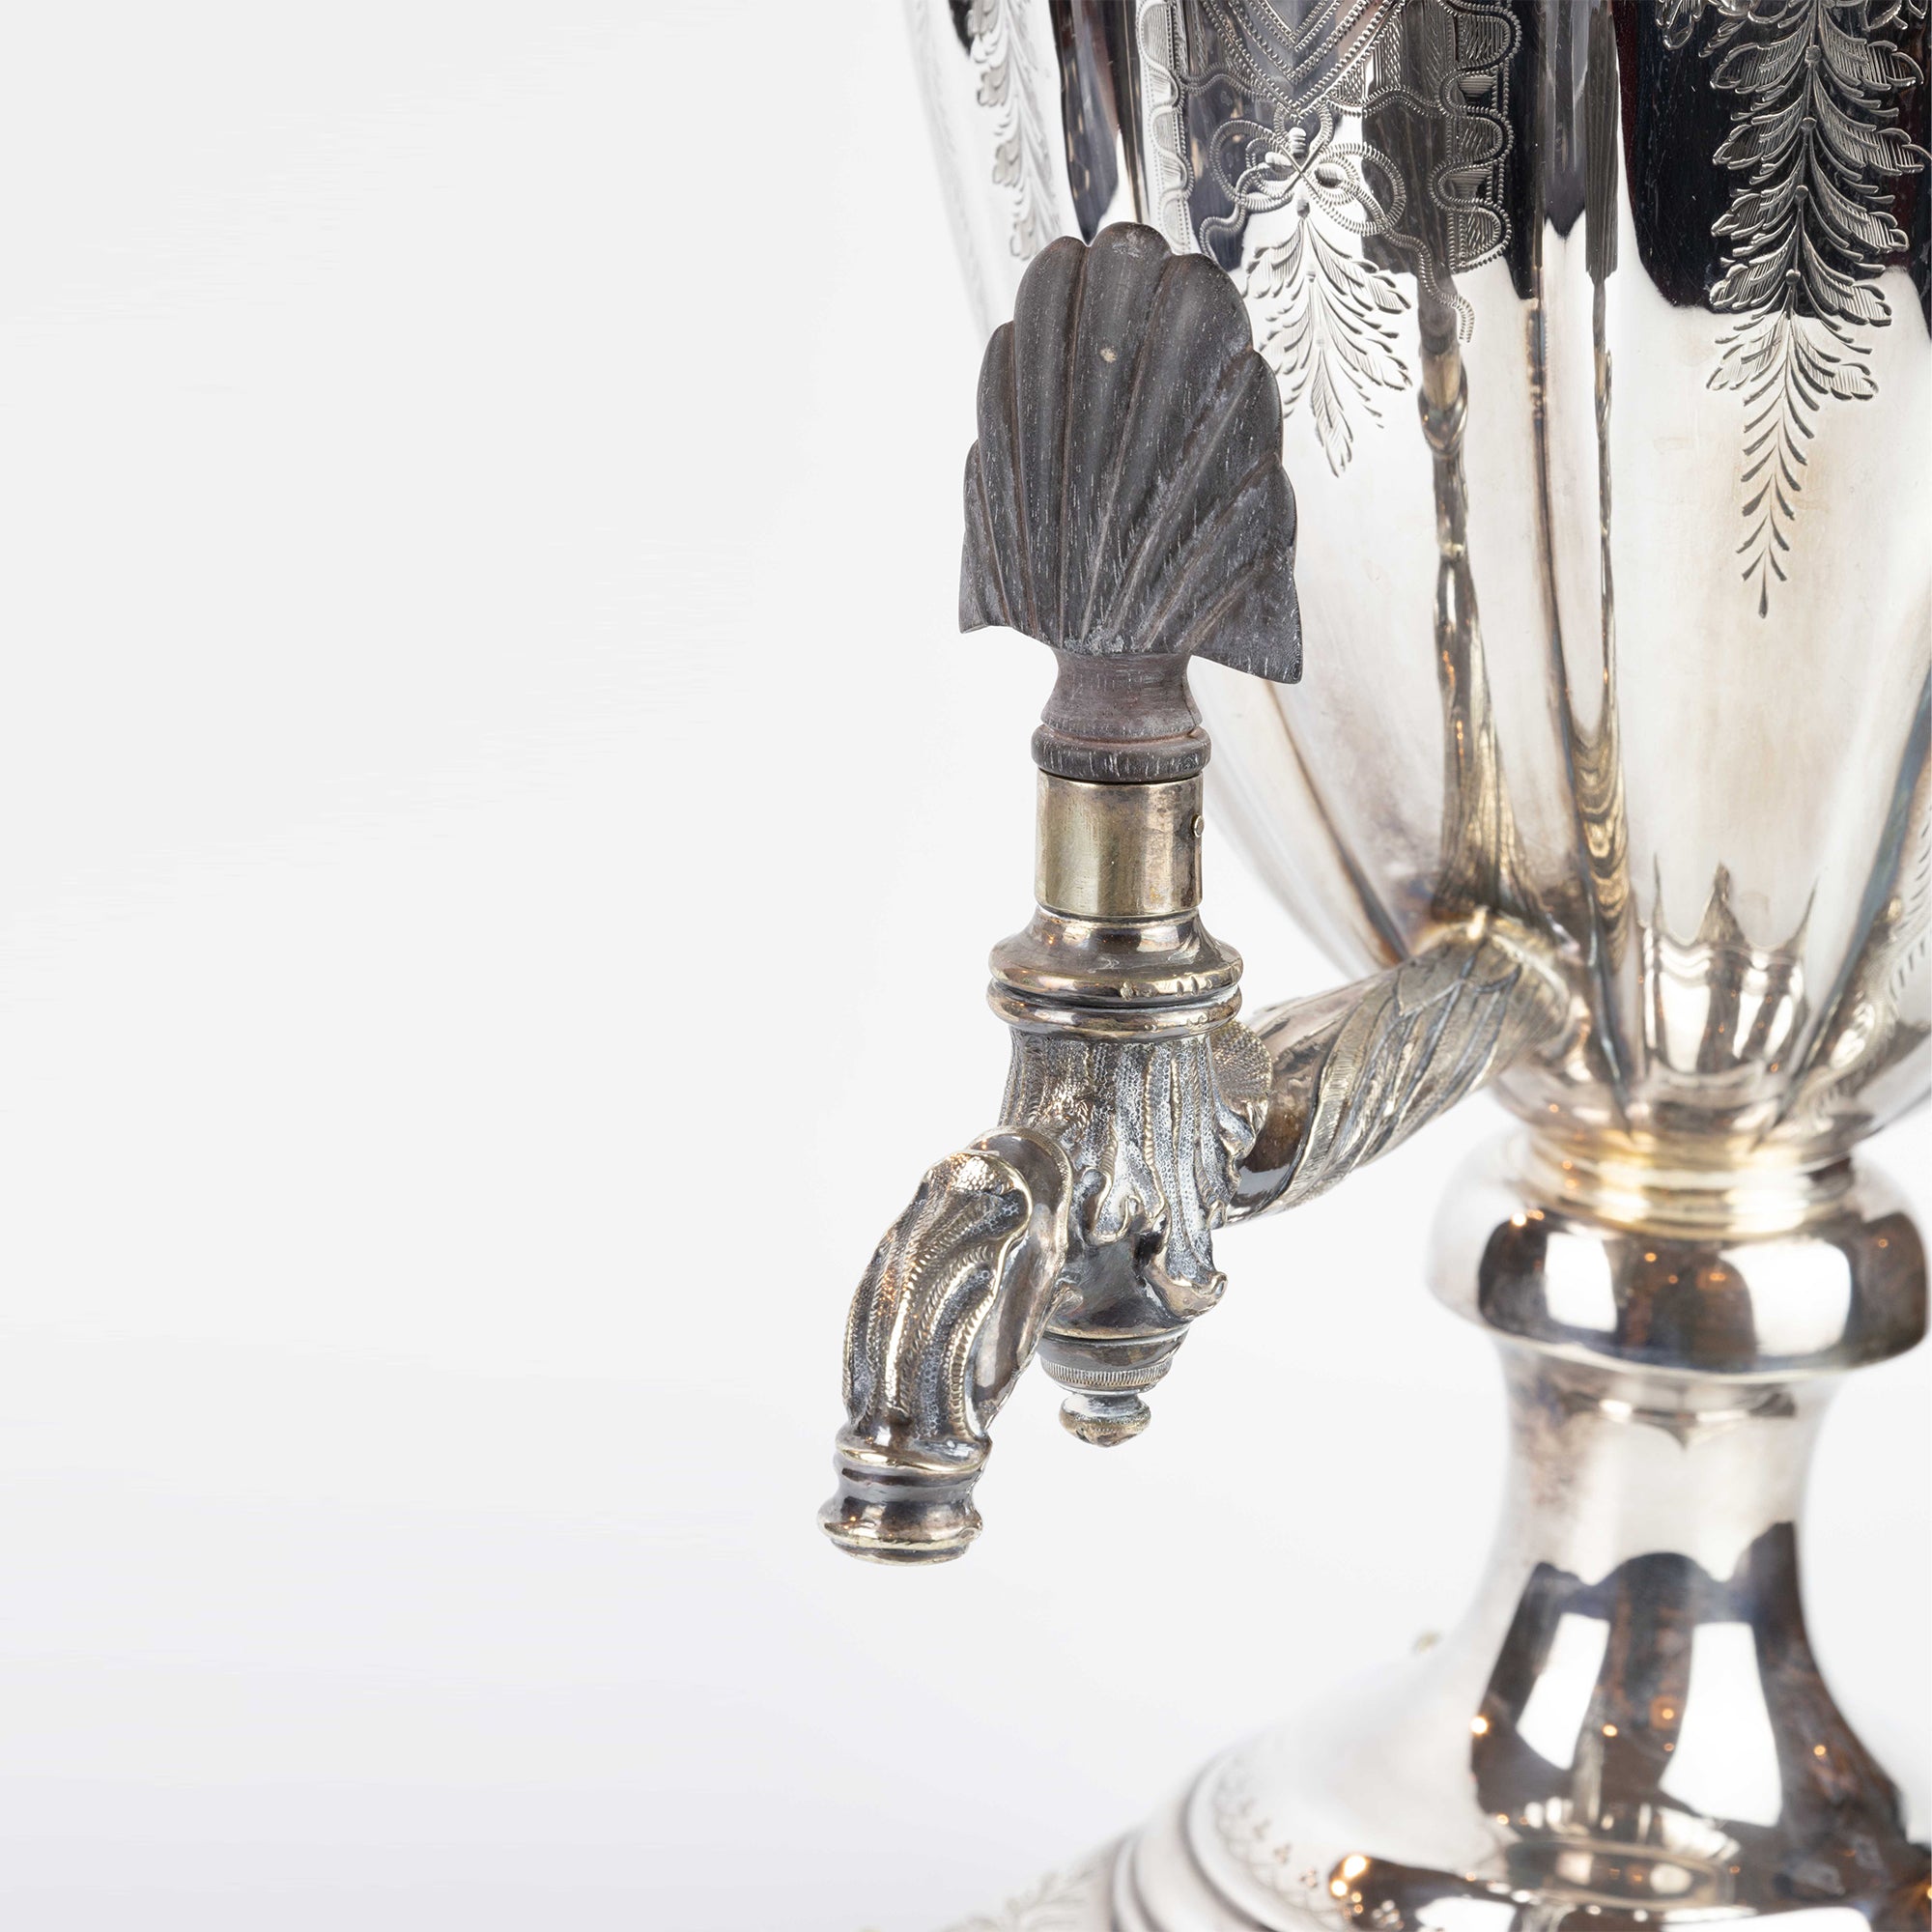 P0933 Silver Plated Two-Handed Tea Urn